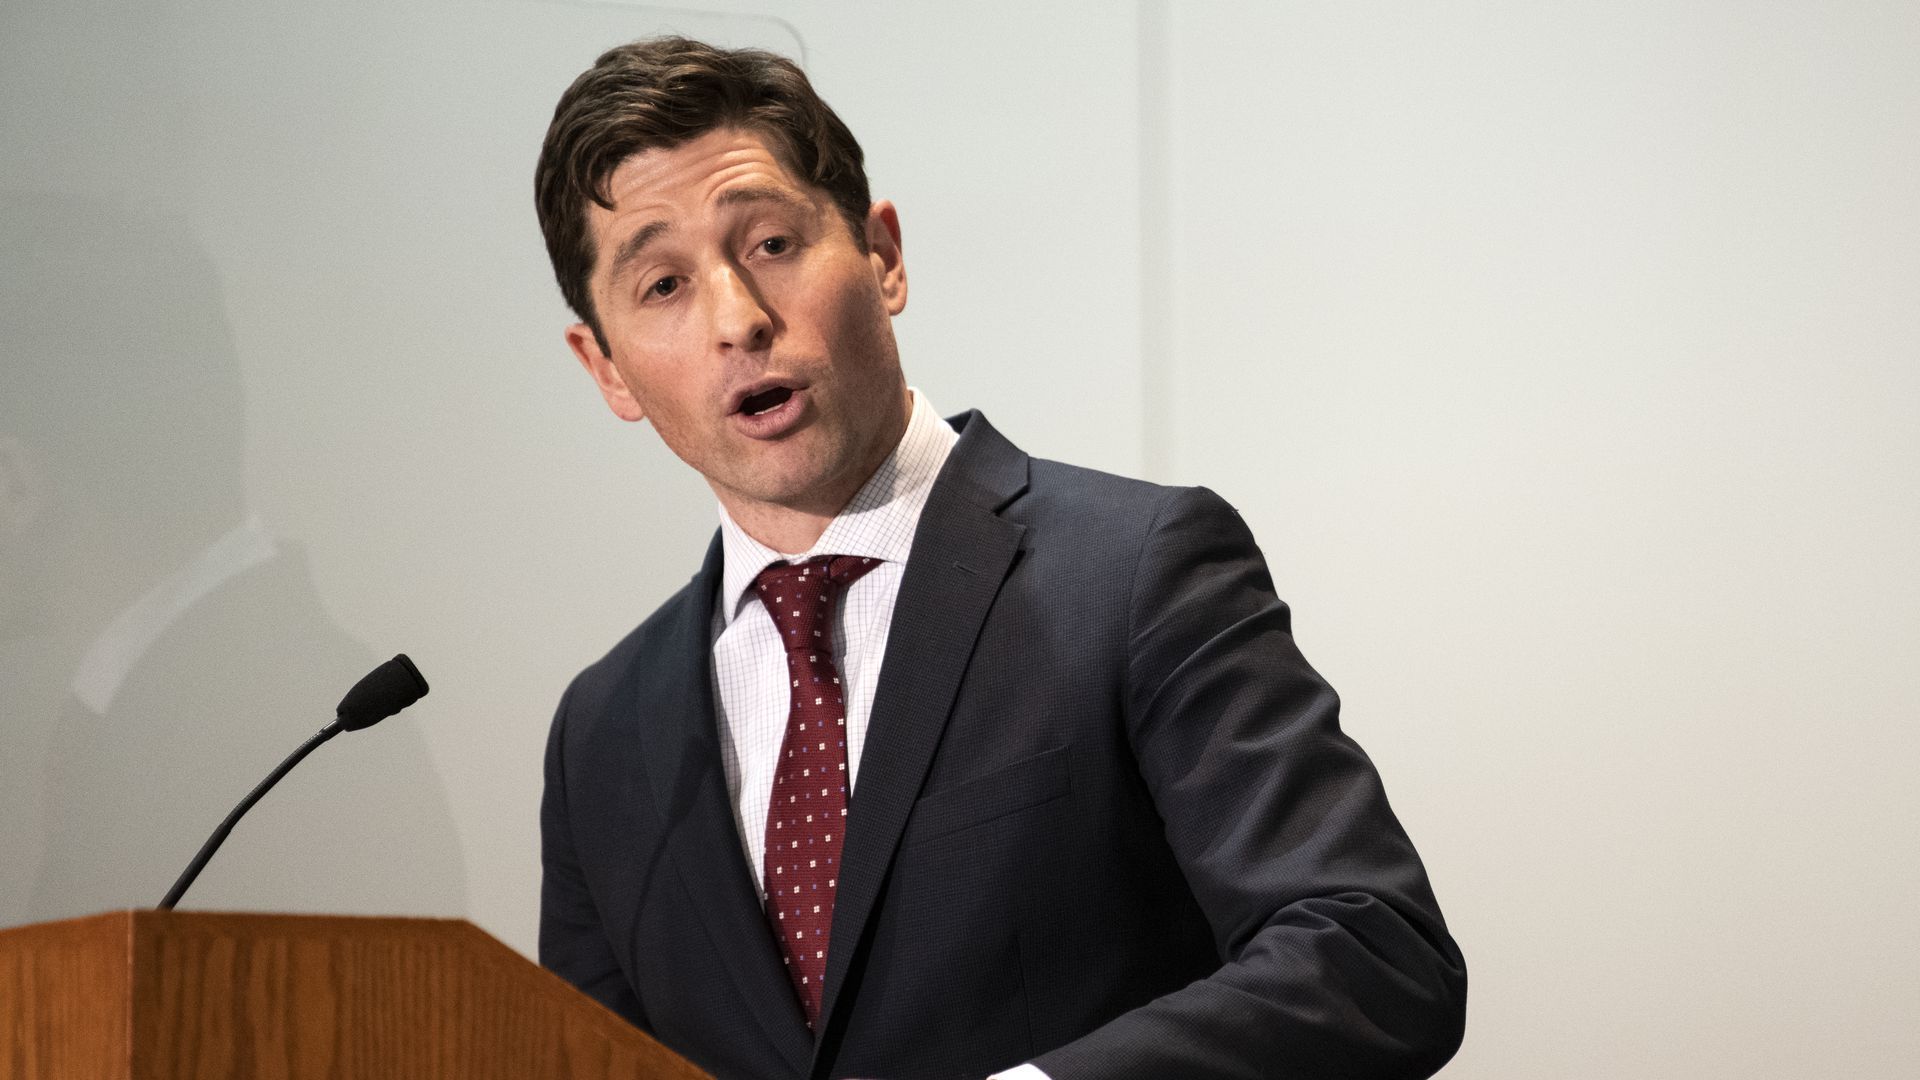 Minneapolis Mayor Jacob Frey stands at a lecturn